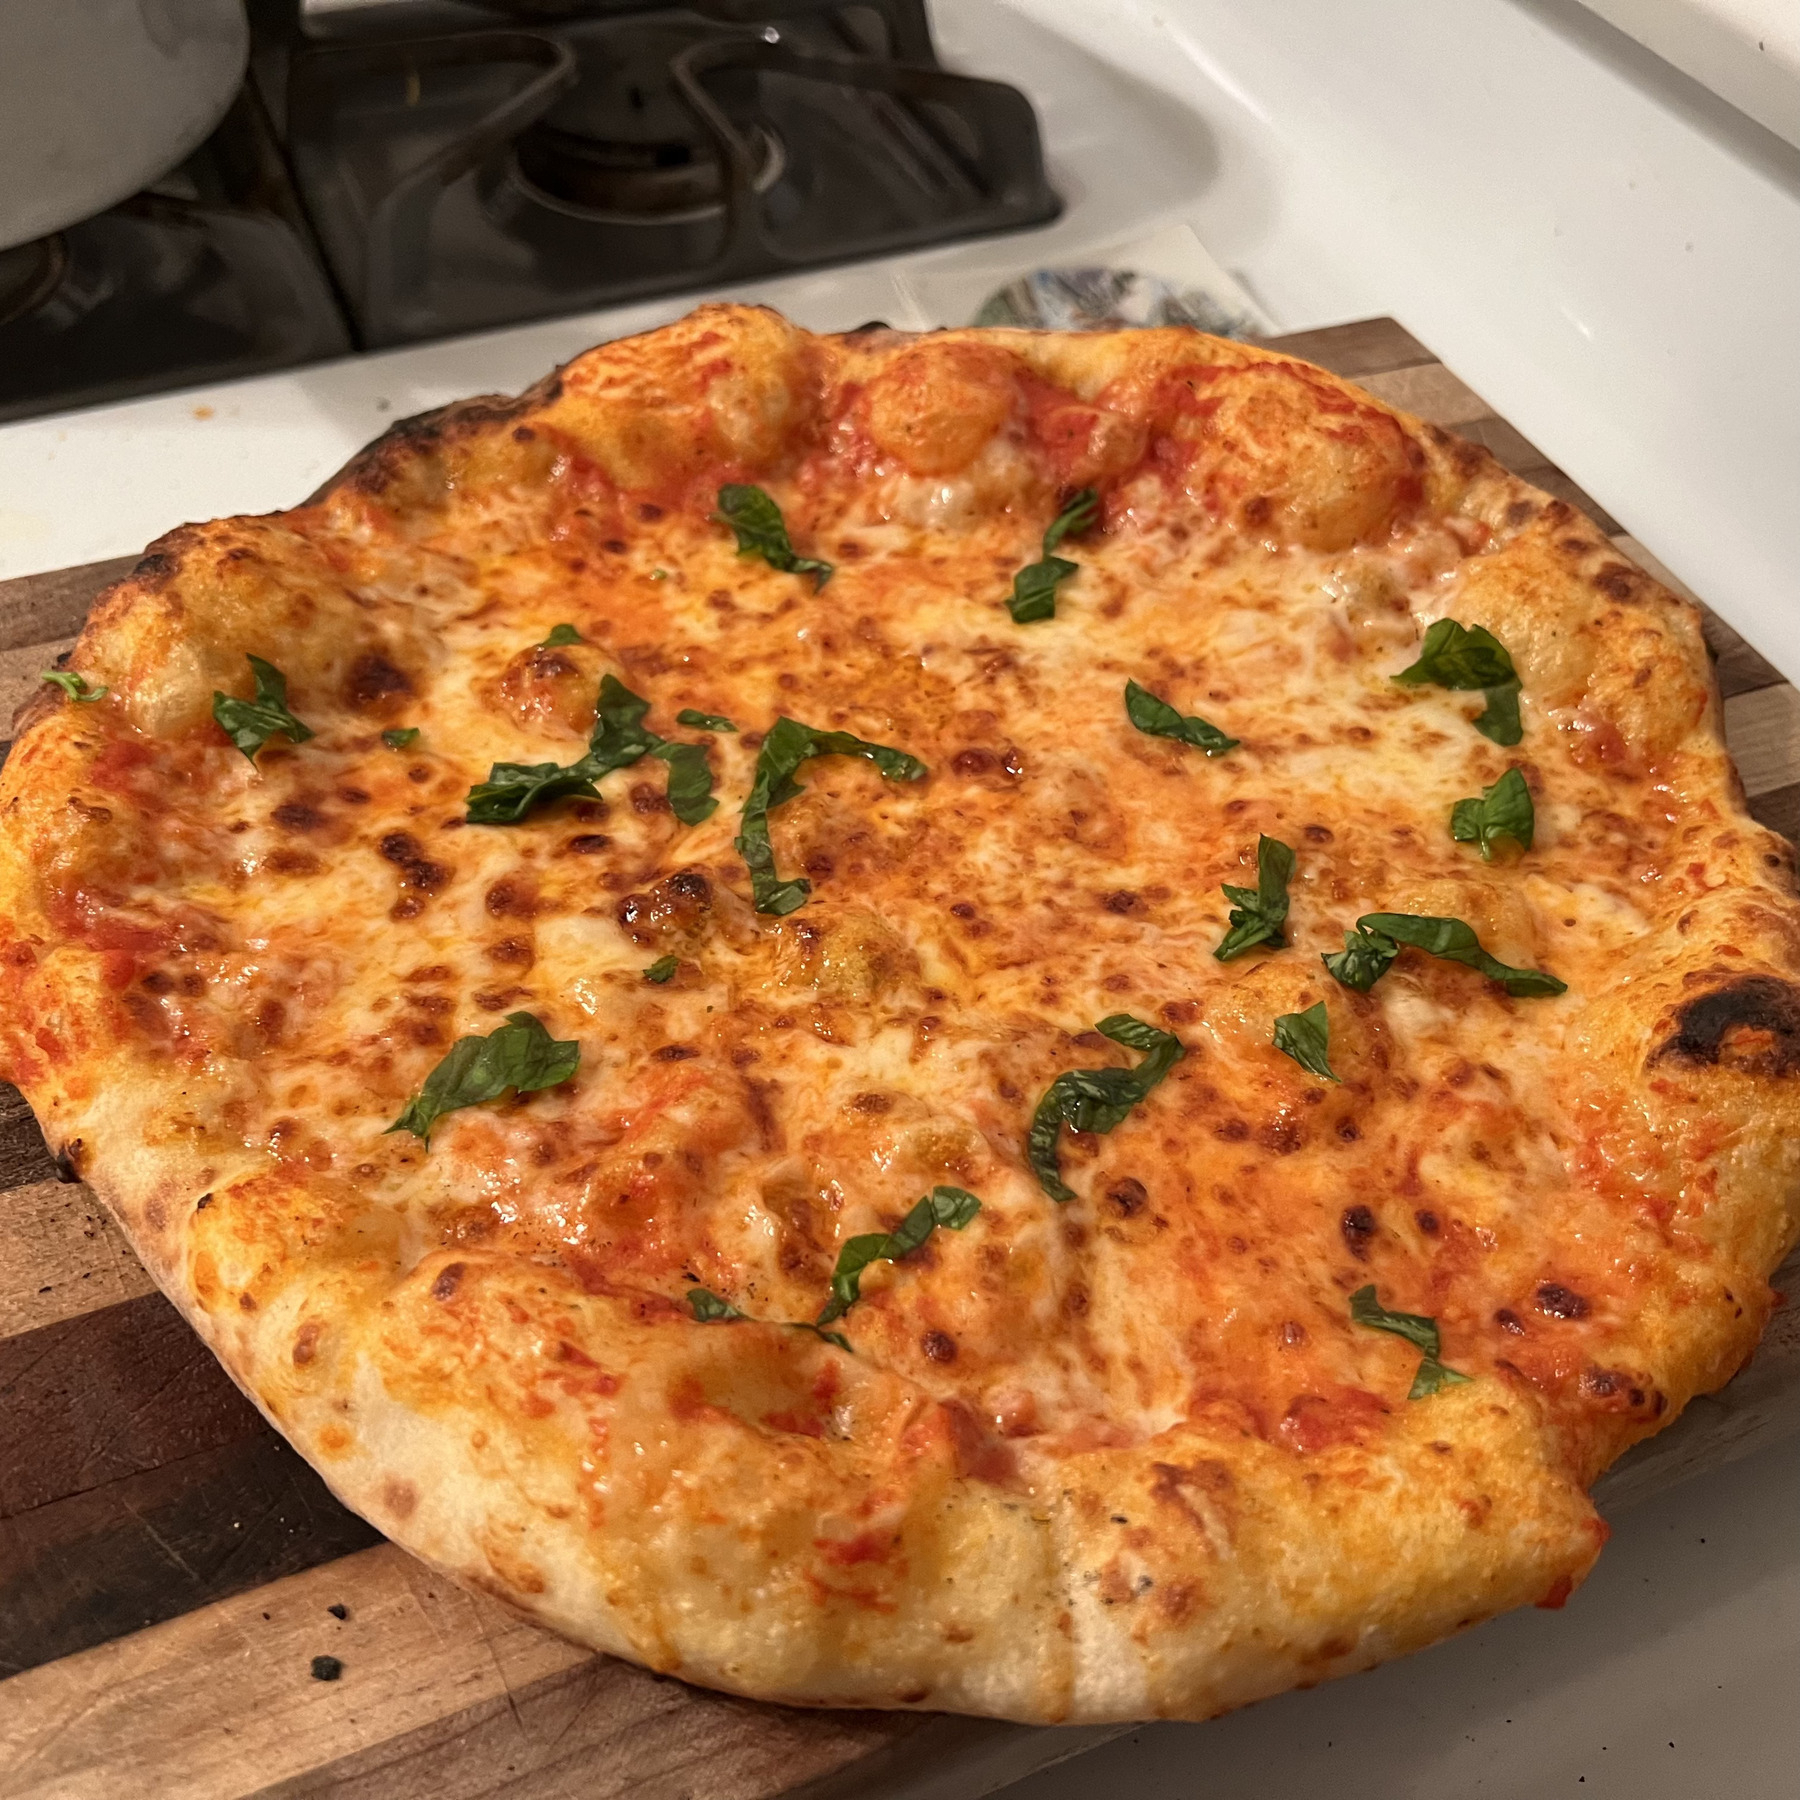 Cheese pizza with basil strips sprinkled on top. The edges of the pizza are bubbly and filled with air.